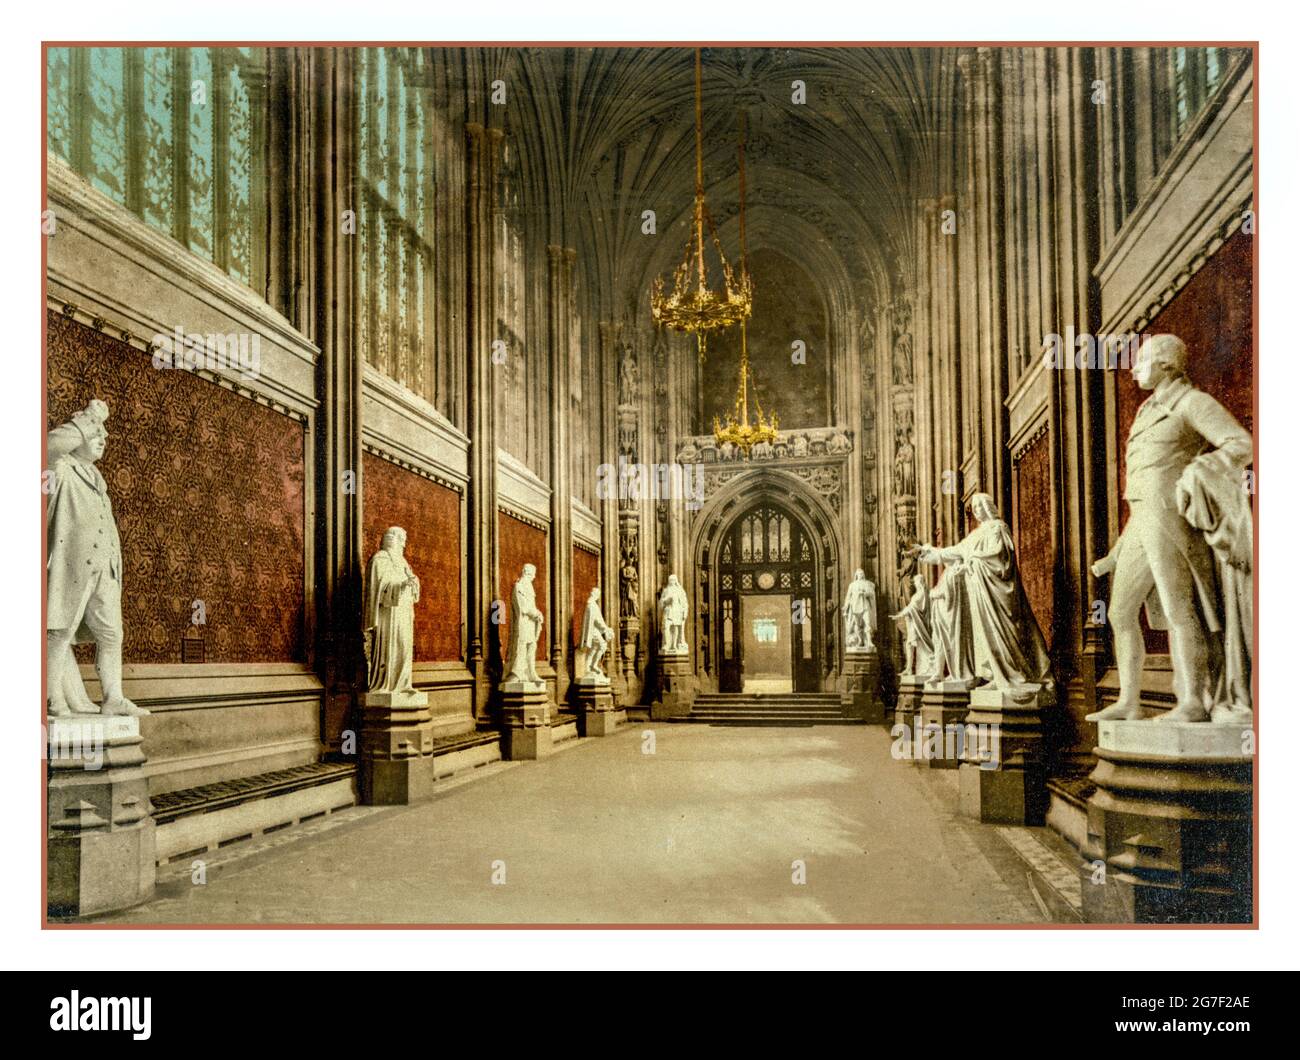 ST STEPHENS HALL Historic Victorian London Image 1900s Palace of Westminster Houses of Parliament, St. Stephen's Hall (Interior), London, England] Photochrom  ca. 1890 and ca. 1900. Statues of famous parliamentarians face one another on either side of the Hall; these include John Hampden, Robert Walpole, William Pitt, Charles James Fox. On either side of the doorways are statues of early Kings and Queens of England. Stock Photo